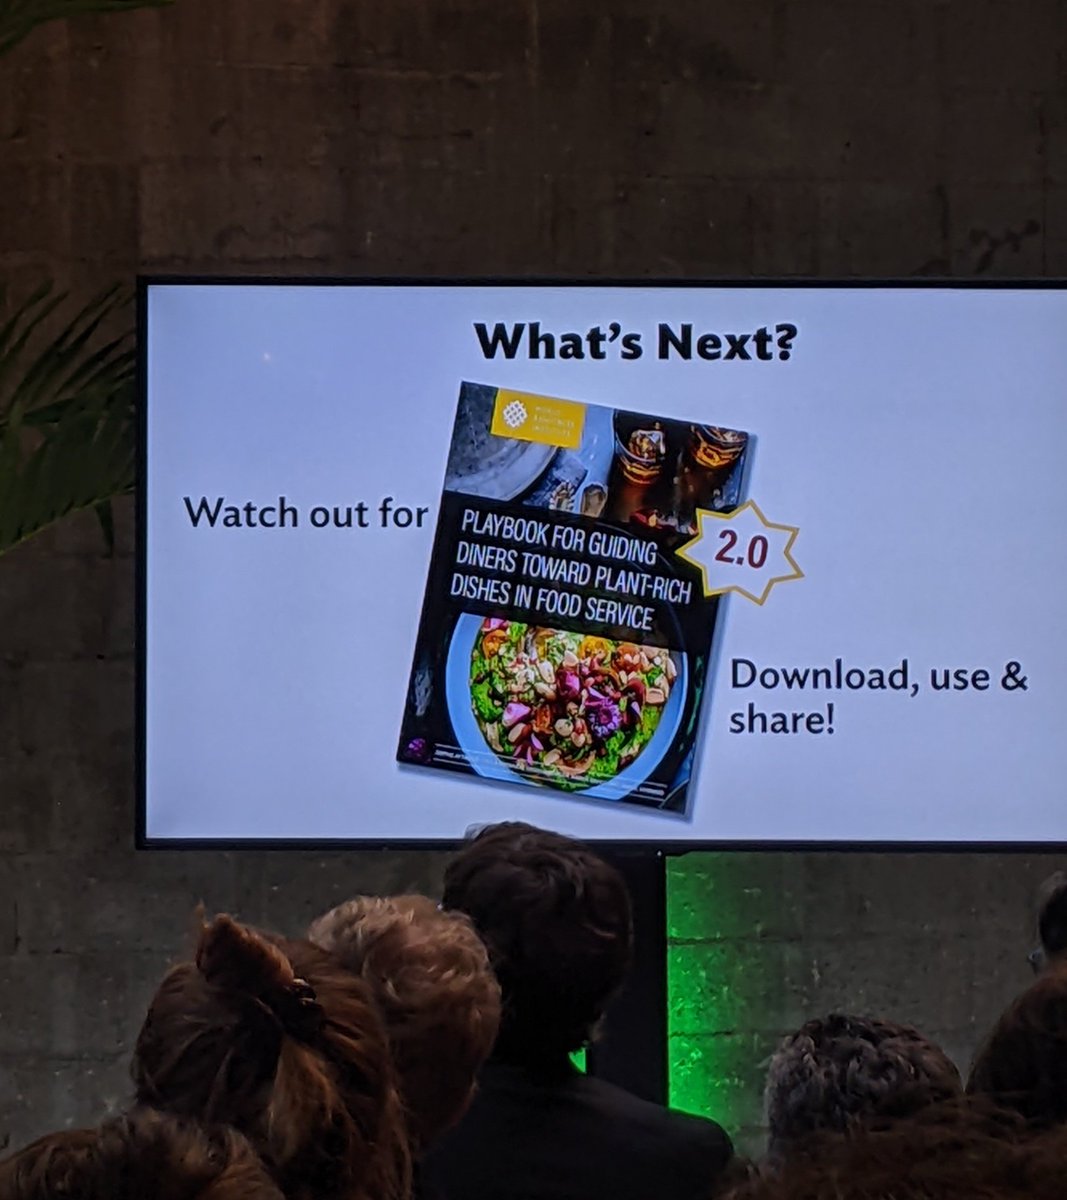 Grateful for seeing my work for @WRIFood being presented by @sophieattwoodw1 at the organisation's event during #ClimateWeekNYC it's been truly amazing! Our update of the Behavioural Change Playbook will soon be published #shiftingdiets #plantbased

#ClimateWeek @WorldResources